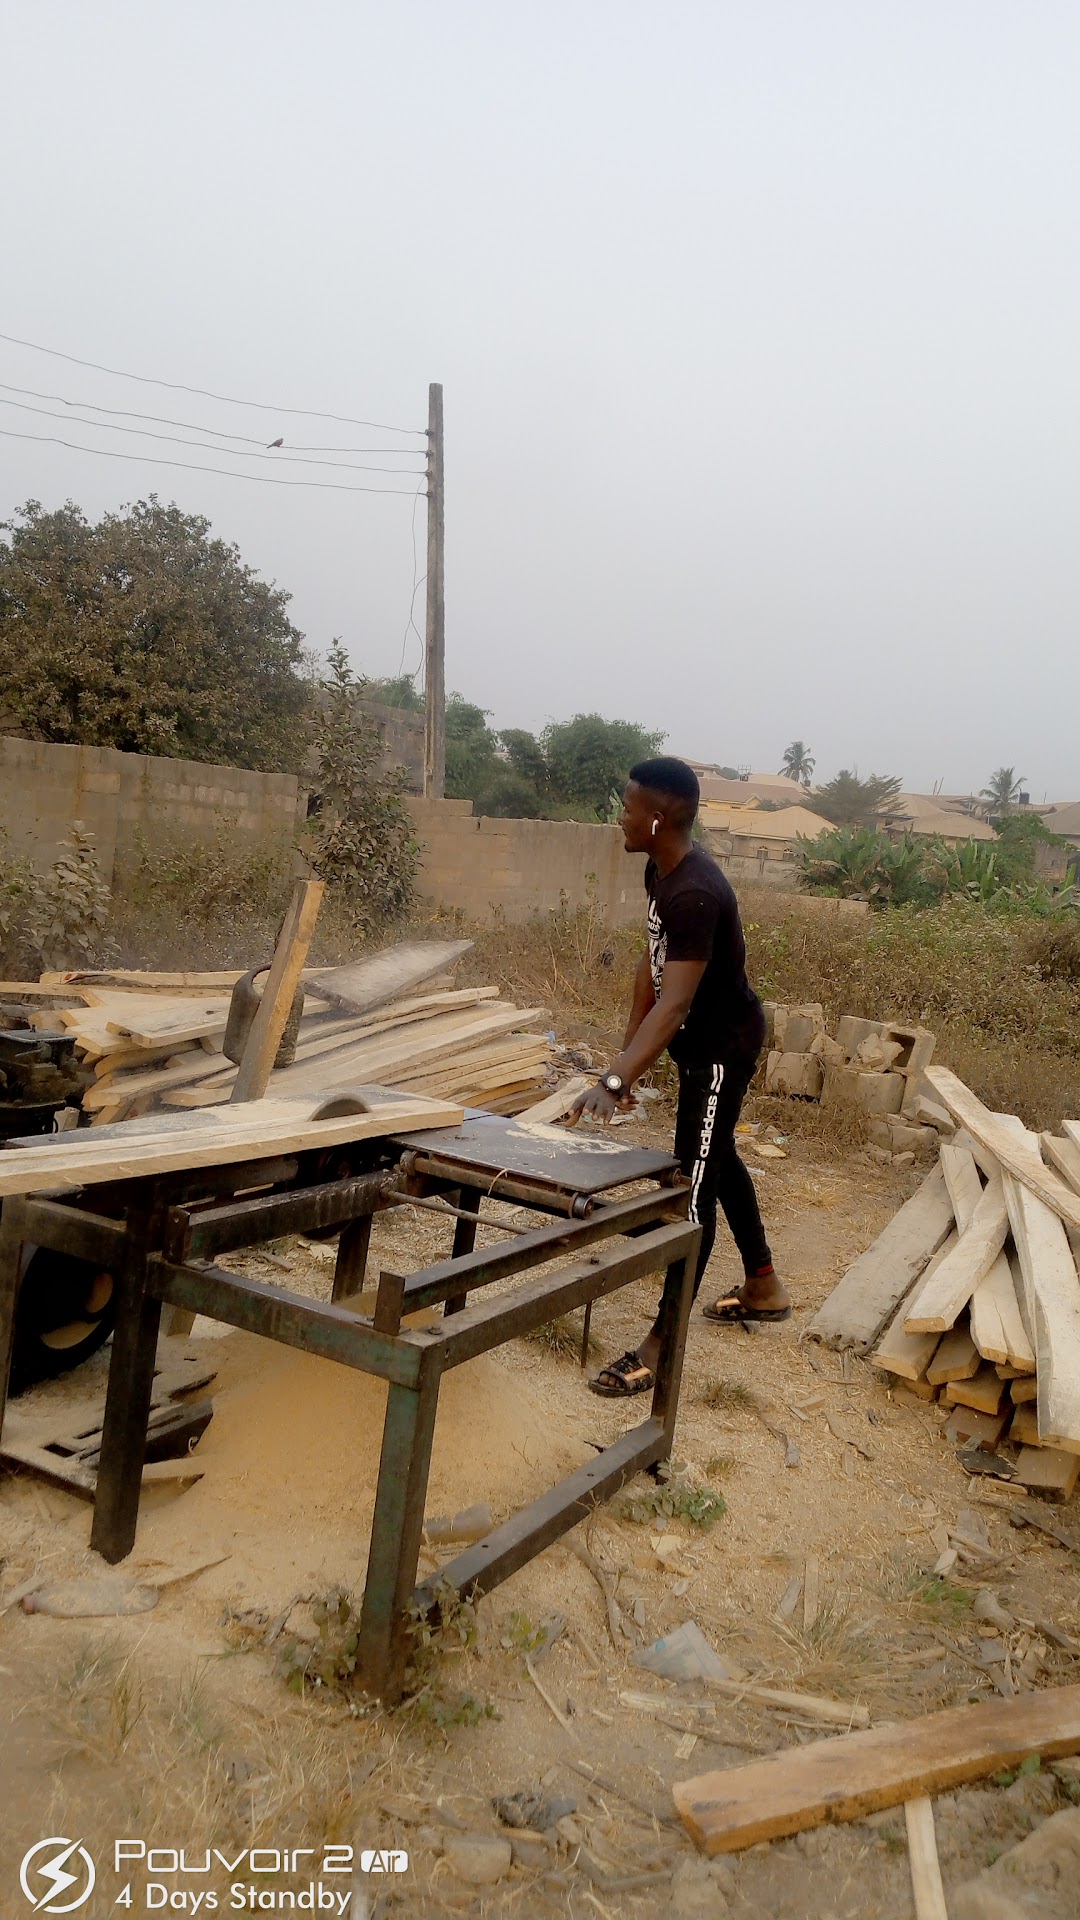 Hephzibah plank and building materials